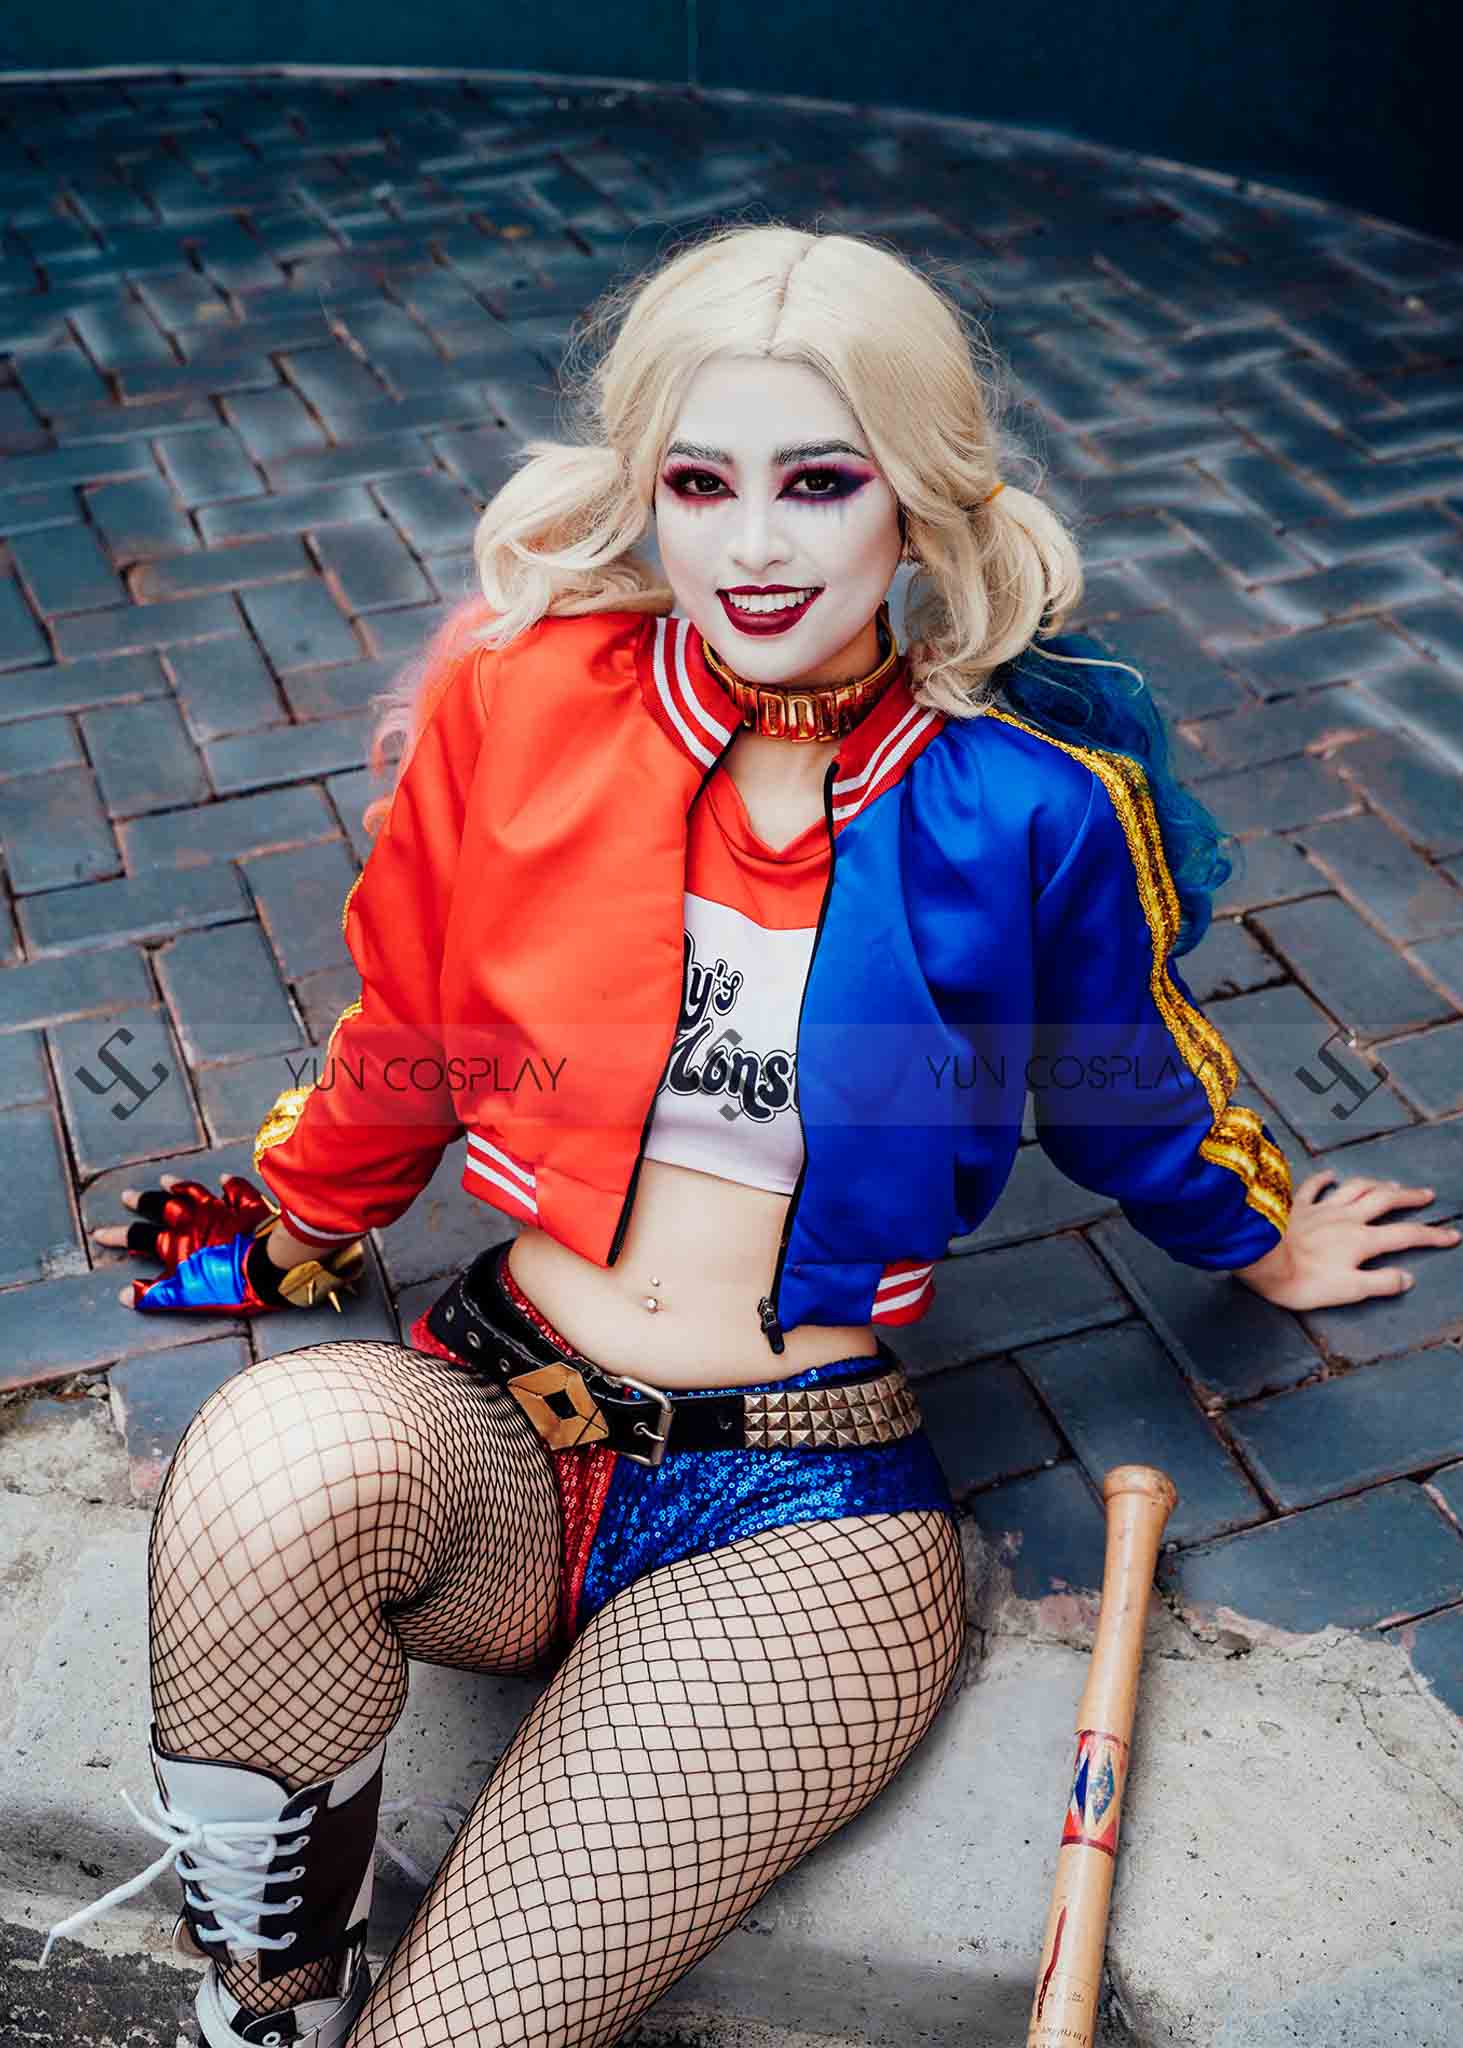 harley-quinn-suicide-squad-2016-2